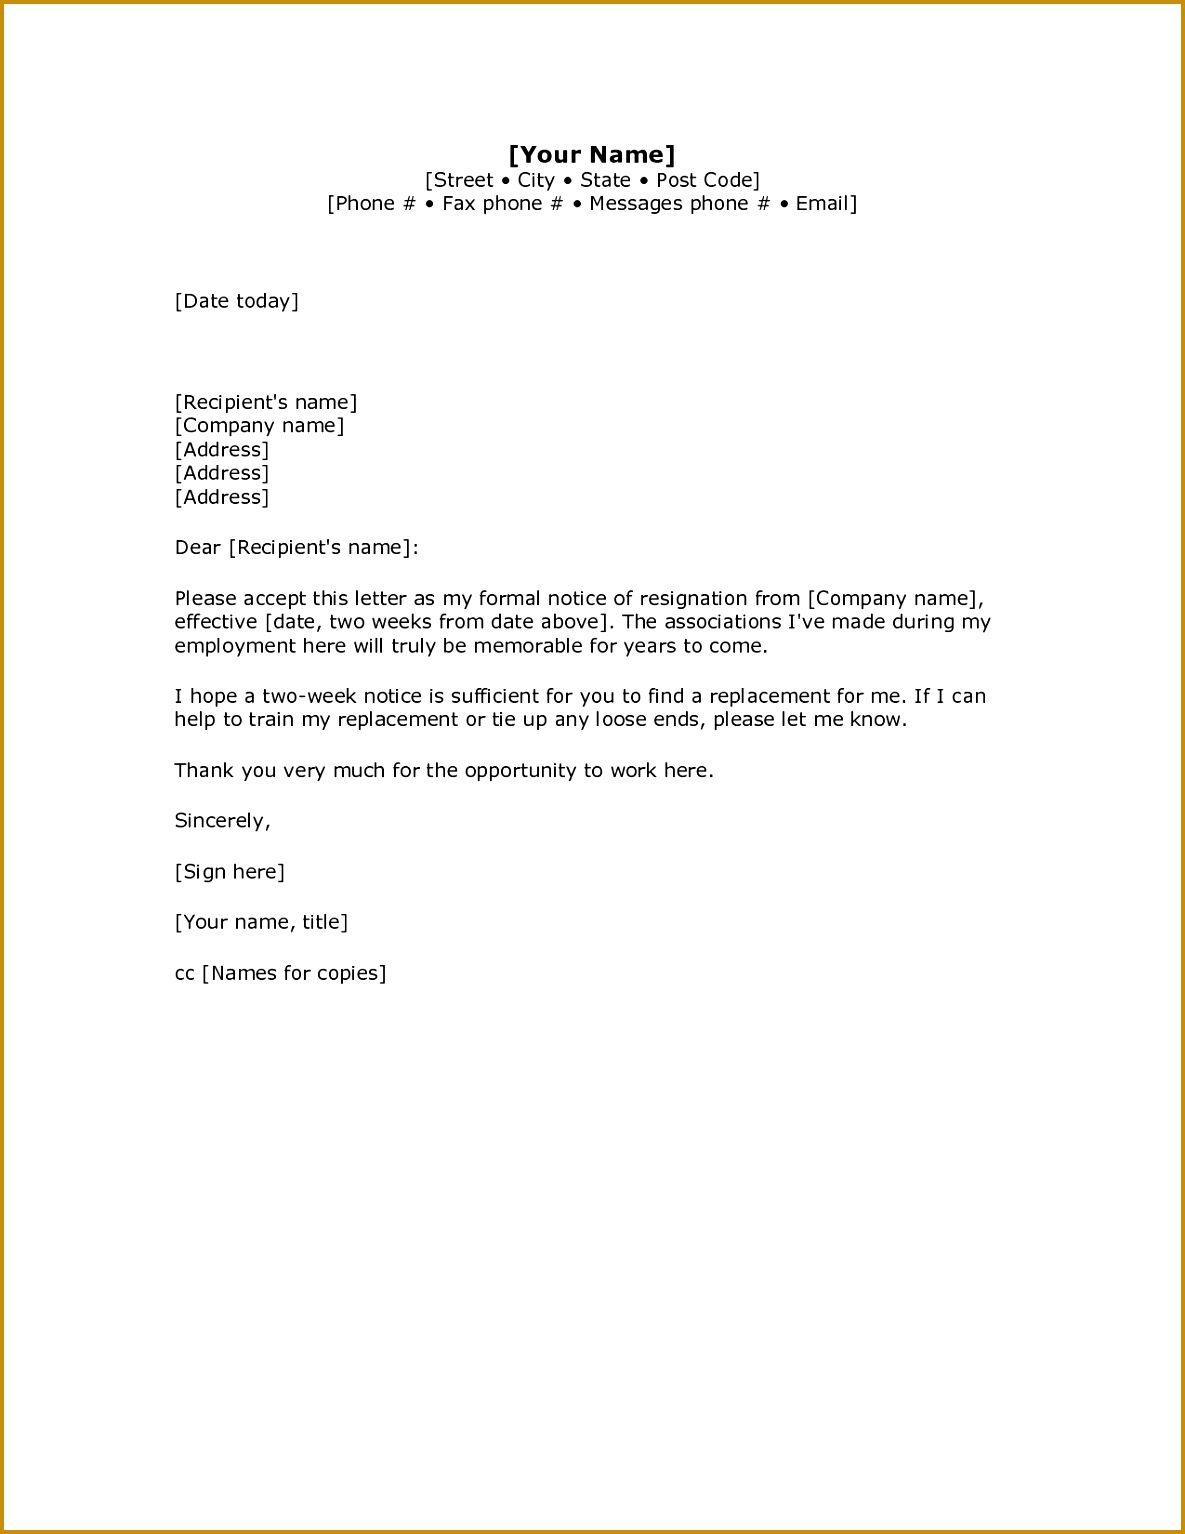 termination letter sample Fresh 2 Weeks Notice Letter Resignation Letter Week Notice Words HDWriting for termination 15341185